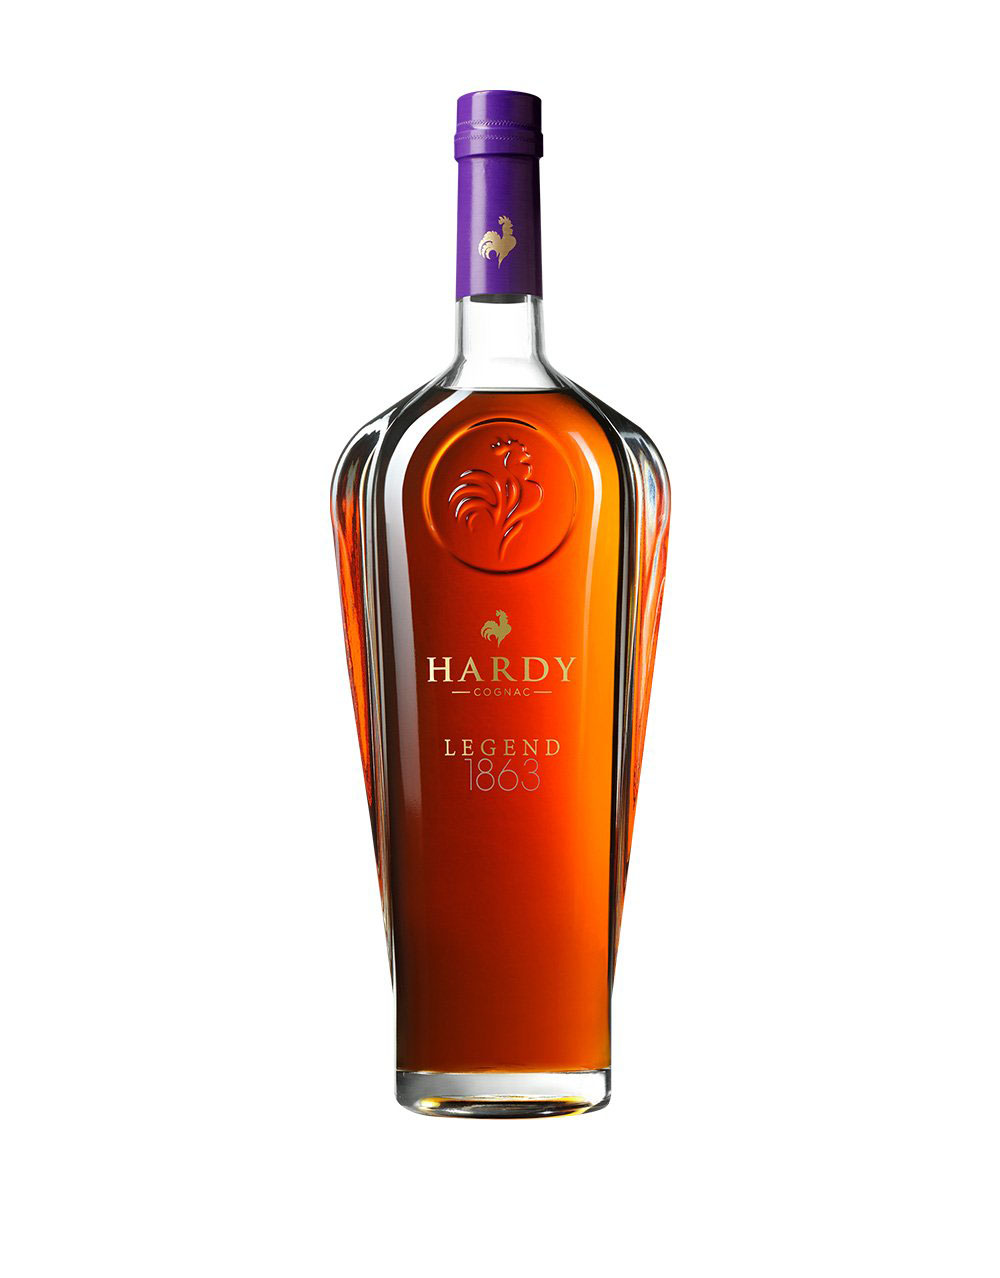 Hardy Noces D'Or Sublime 50 Year Old Cognac